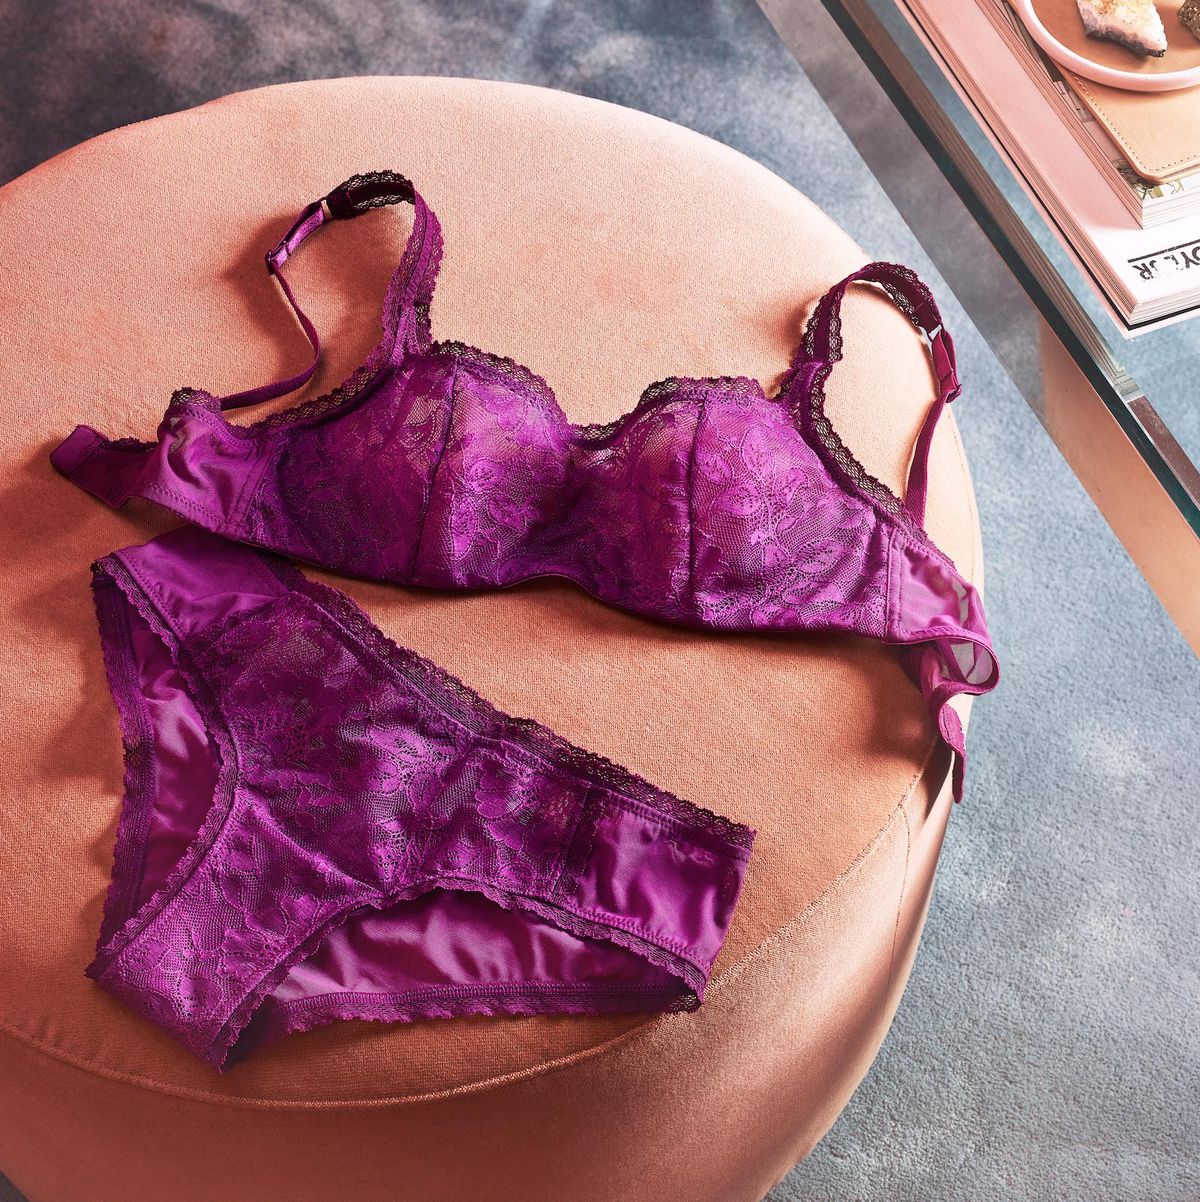 12 Lingerie Upgrades That'll Make You Excited To Wear A Bra Again